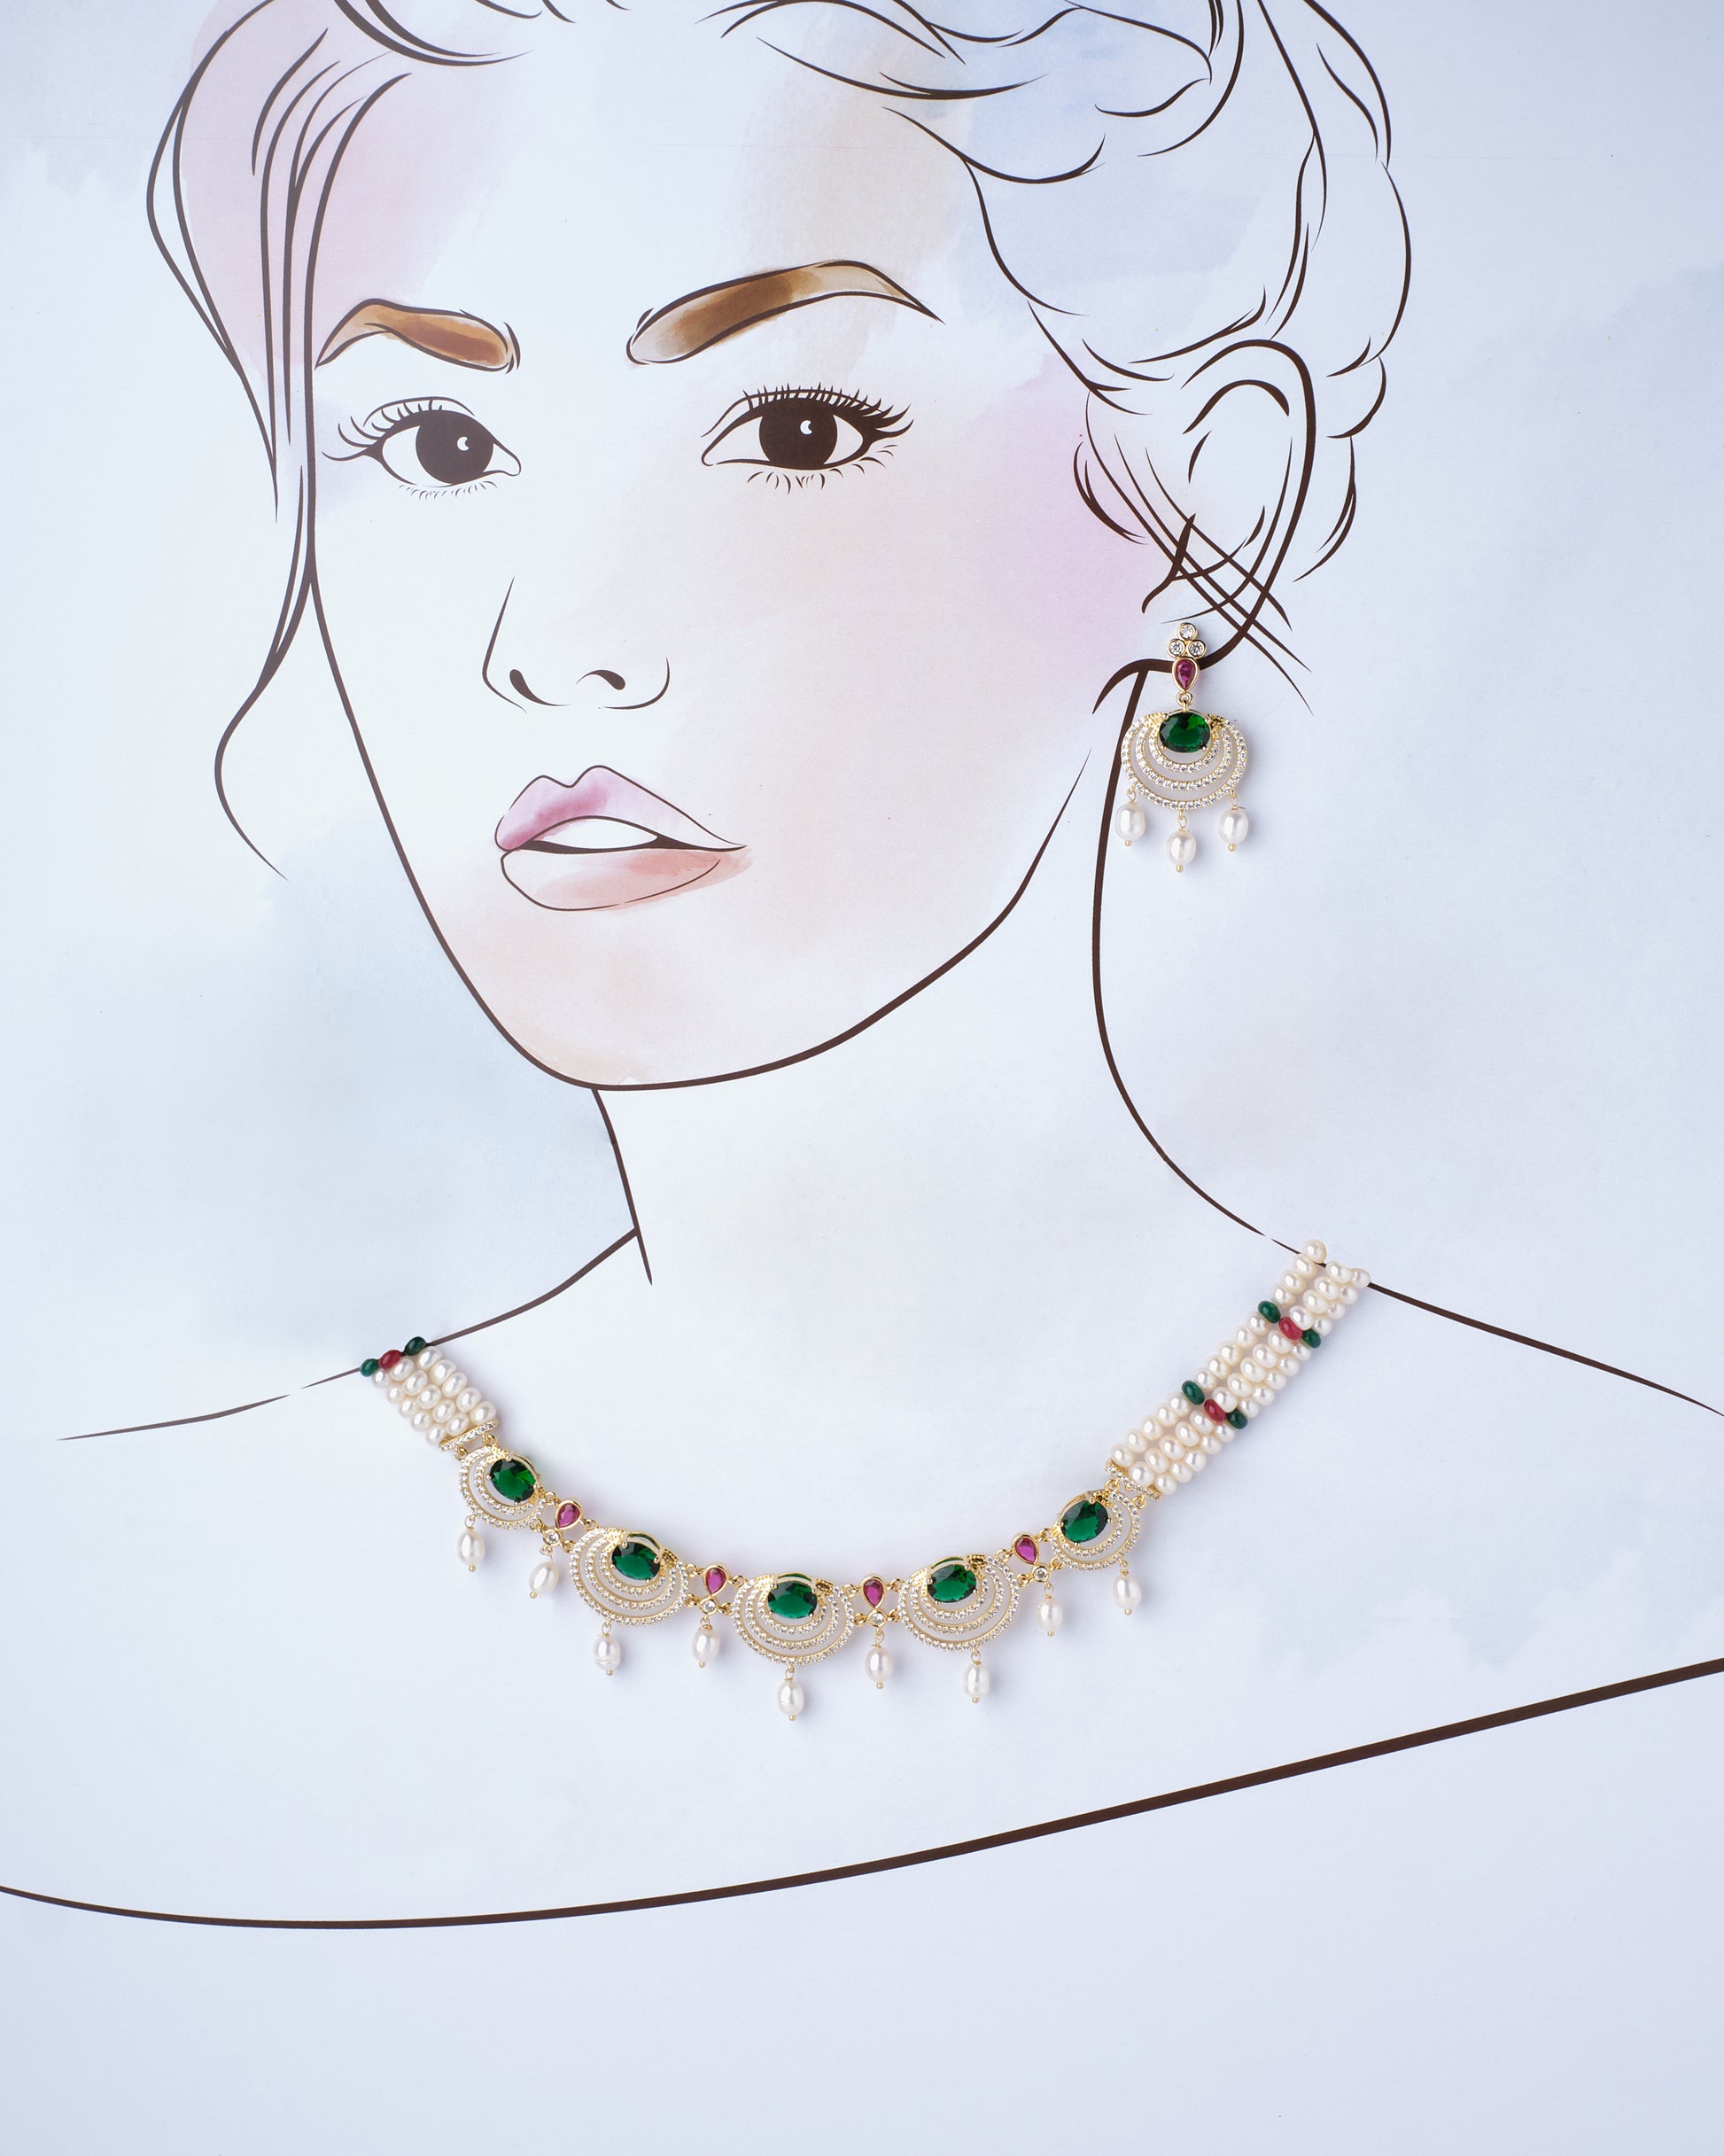 Illustration of a woman's face with real earrings and a Glorious CZ Pendant Pearl Necklace Set by Chandrani Pearls India placed to complement the drawing.